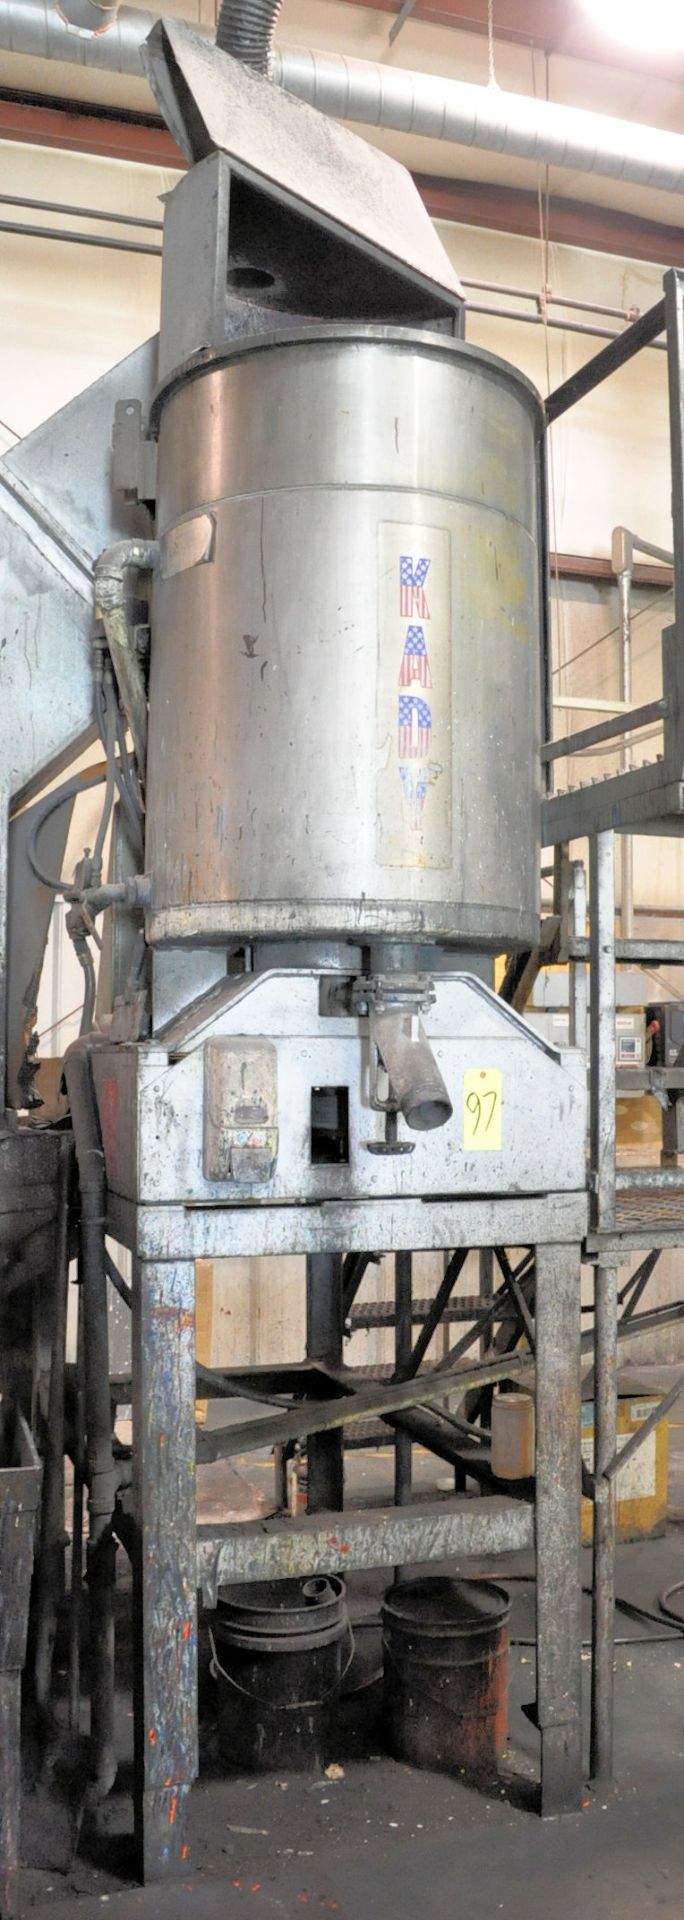 Kady 1,350-Lbs. Capacity Grinding Mill, 50-HP Motor, with Stand and Exhaust Hood - Image 2 of 3